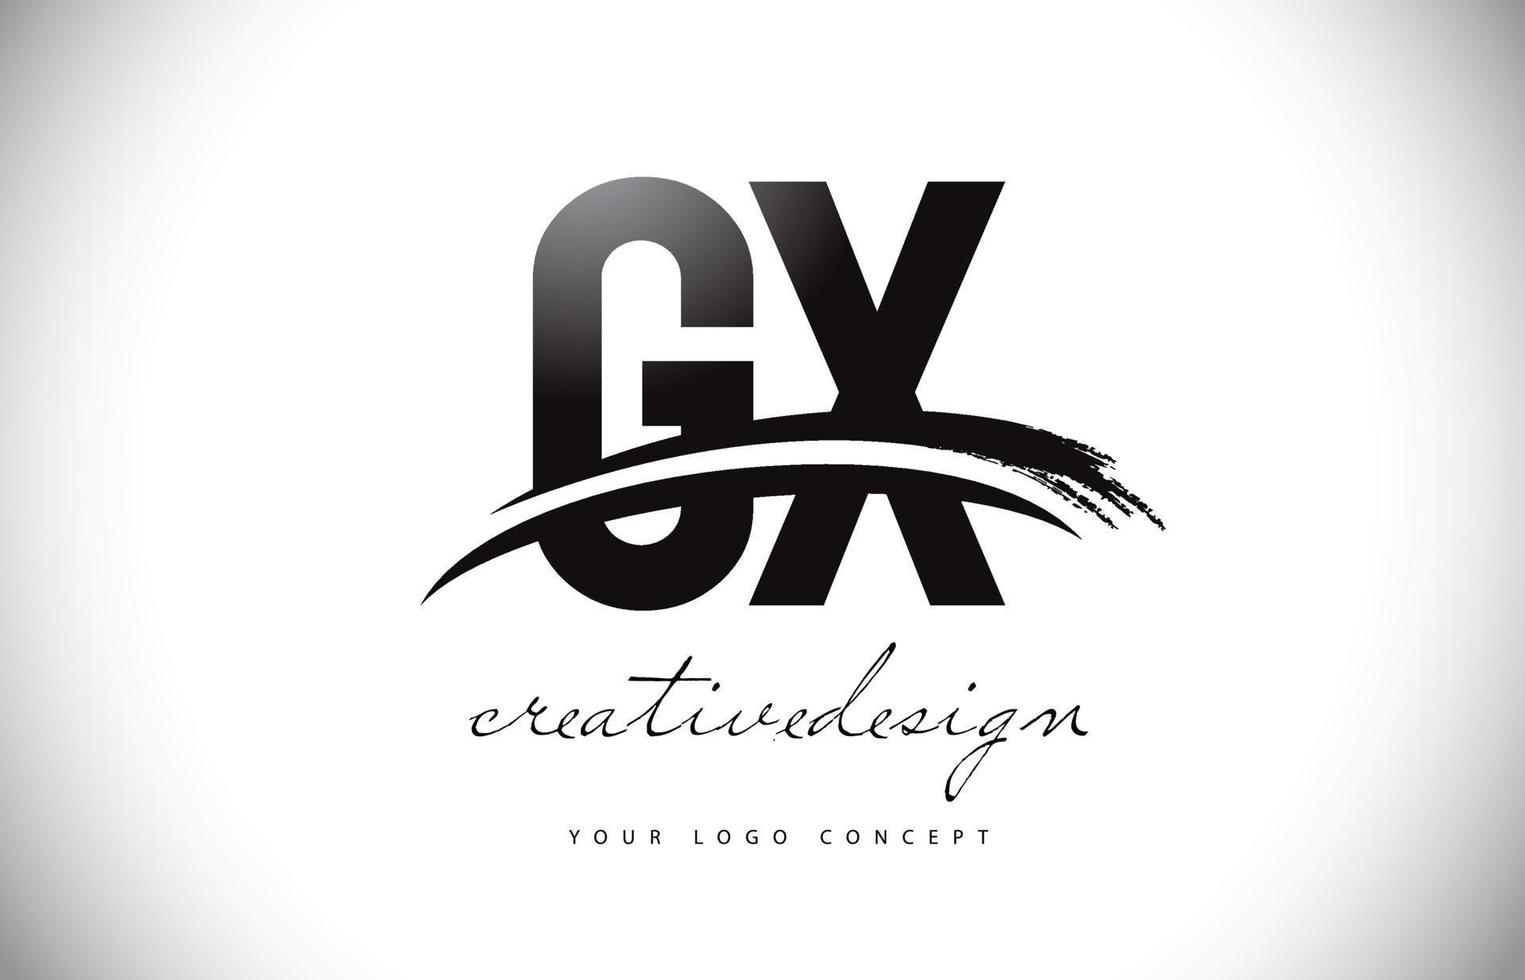 GX G X Letter Logo Design with Swoosh and Black Brush Stroke. vector